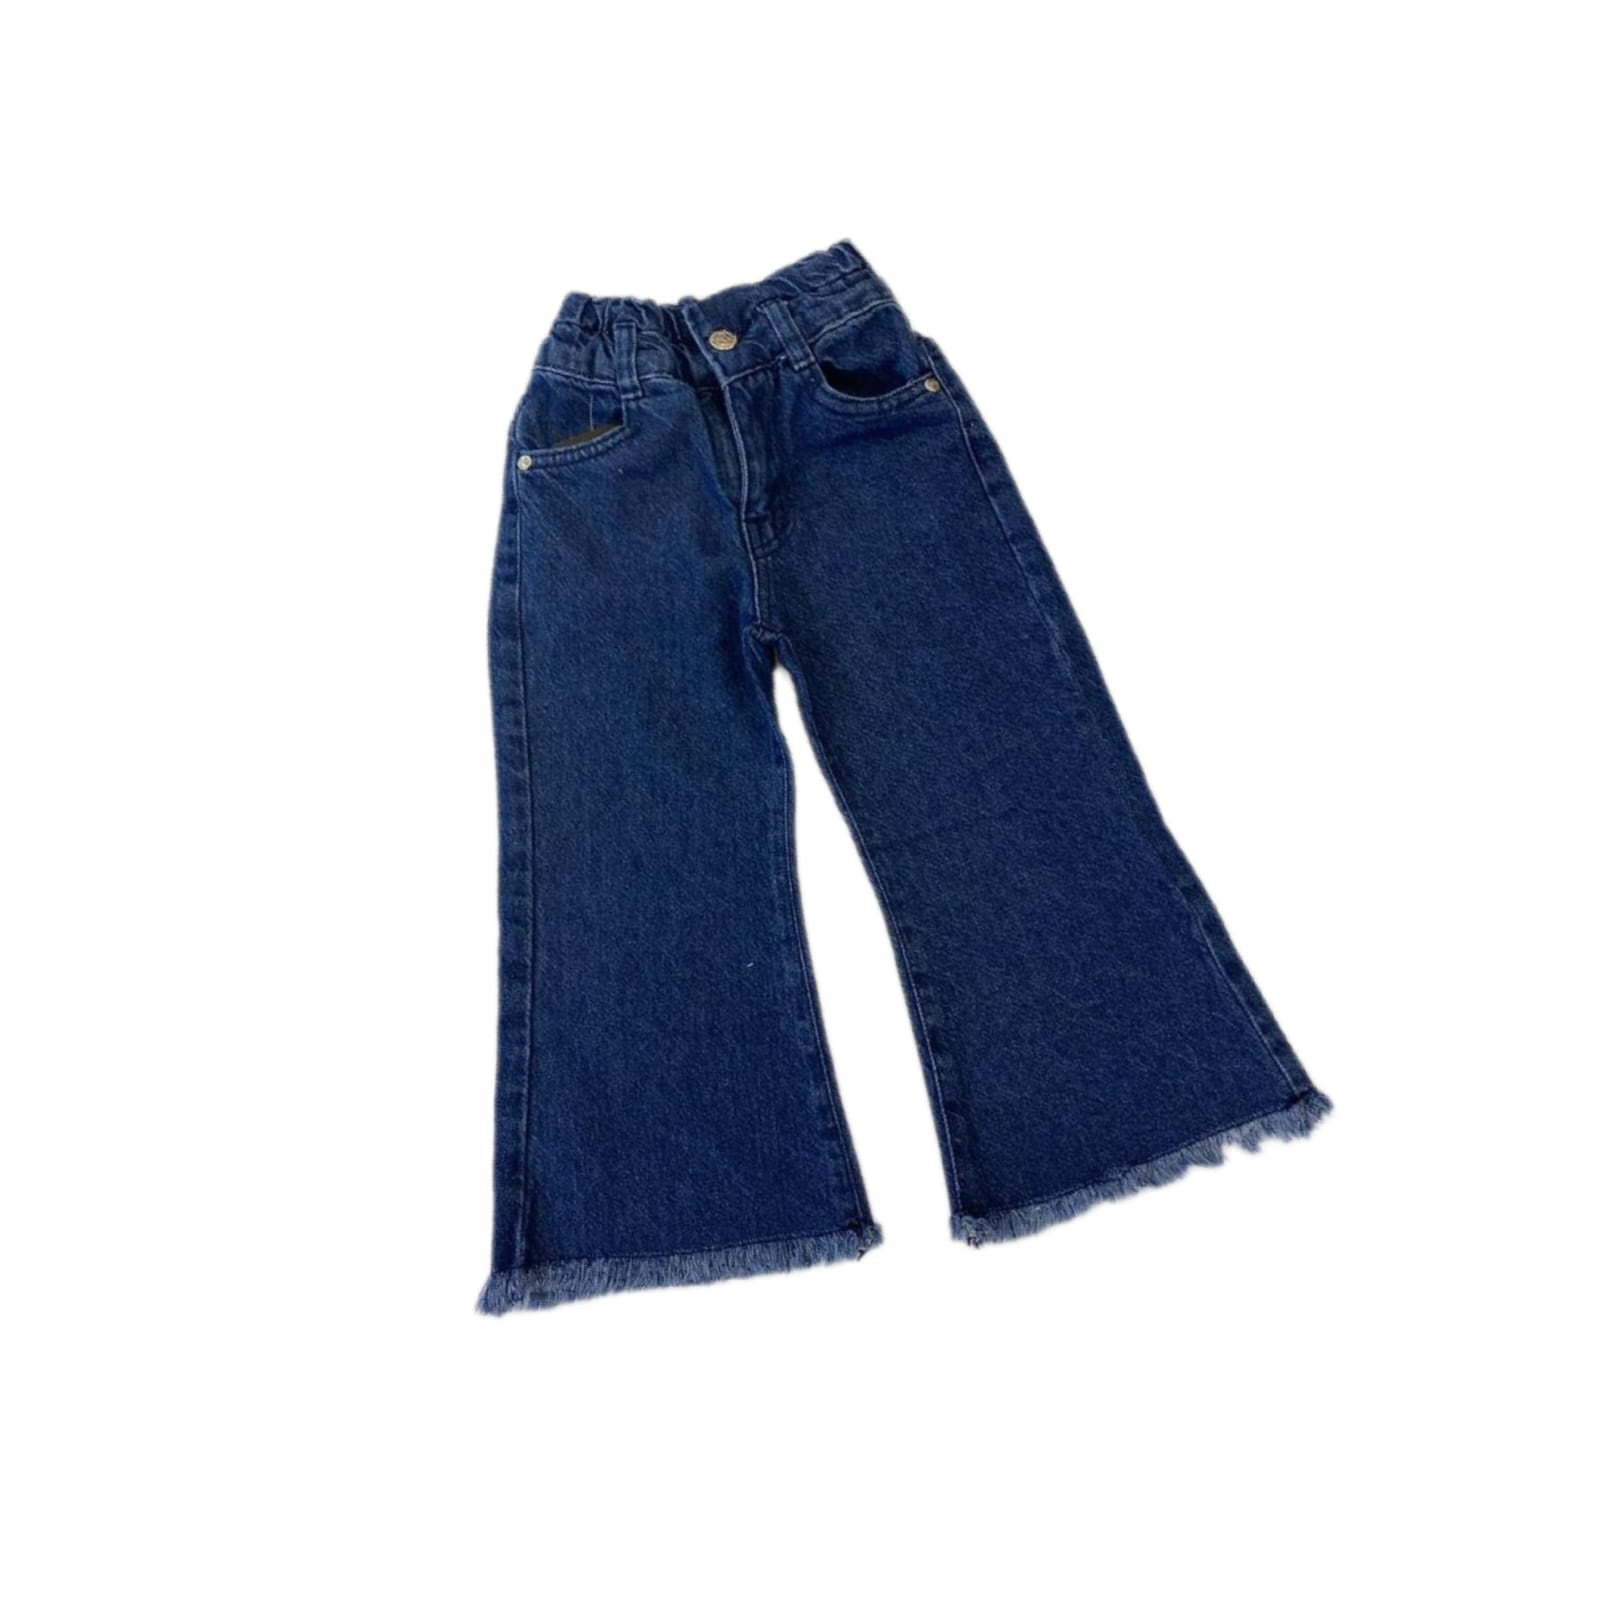 Wide Legs 9 to 14 Years Girls Jeans - Wide Legs 9 to 14 Years Girls Jeans - 9-10 Years - Bobby JR - Melymod